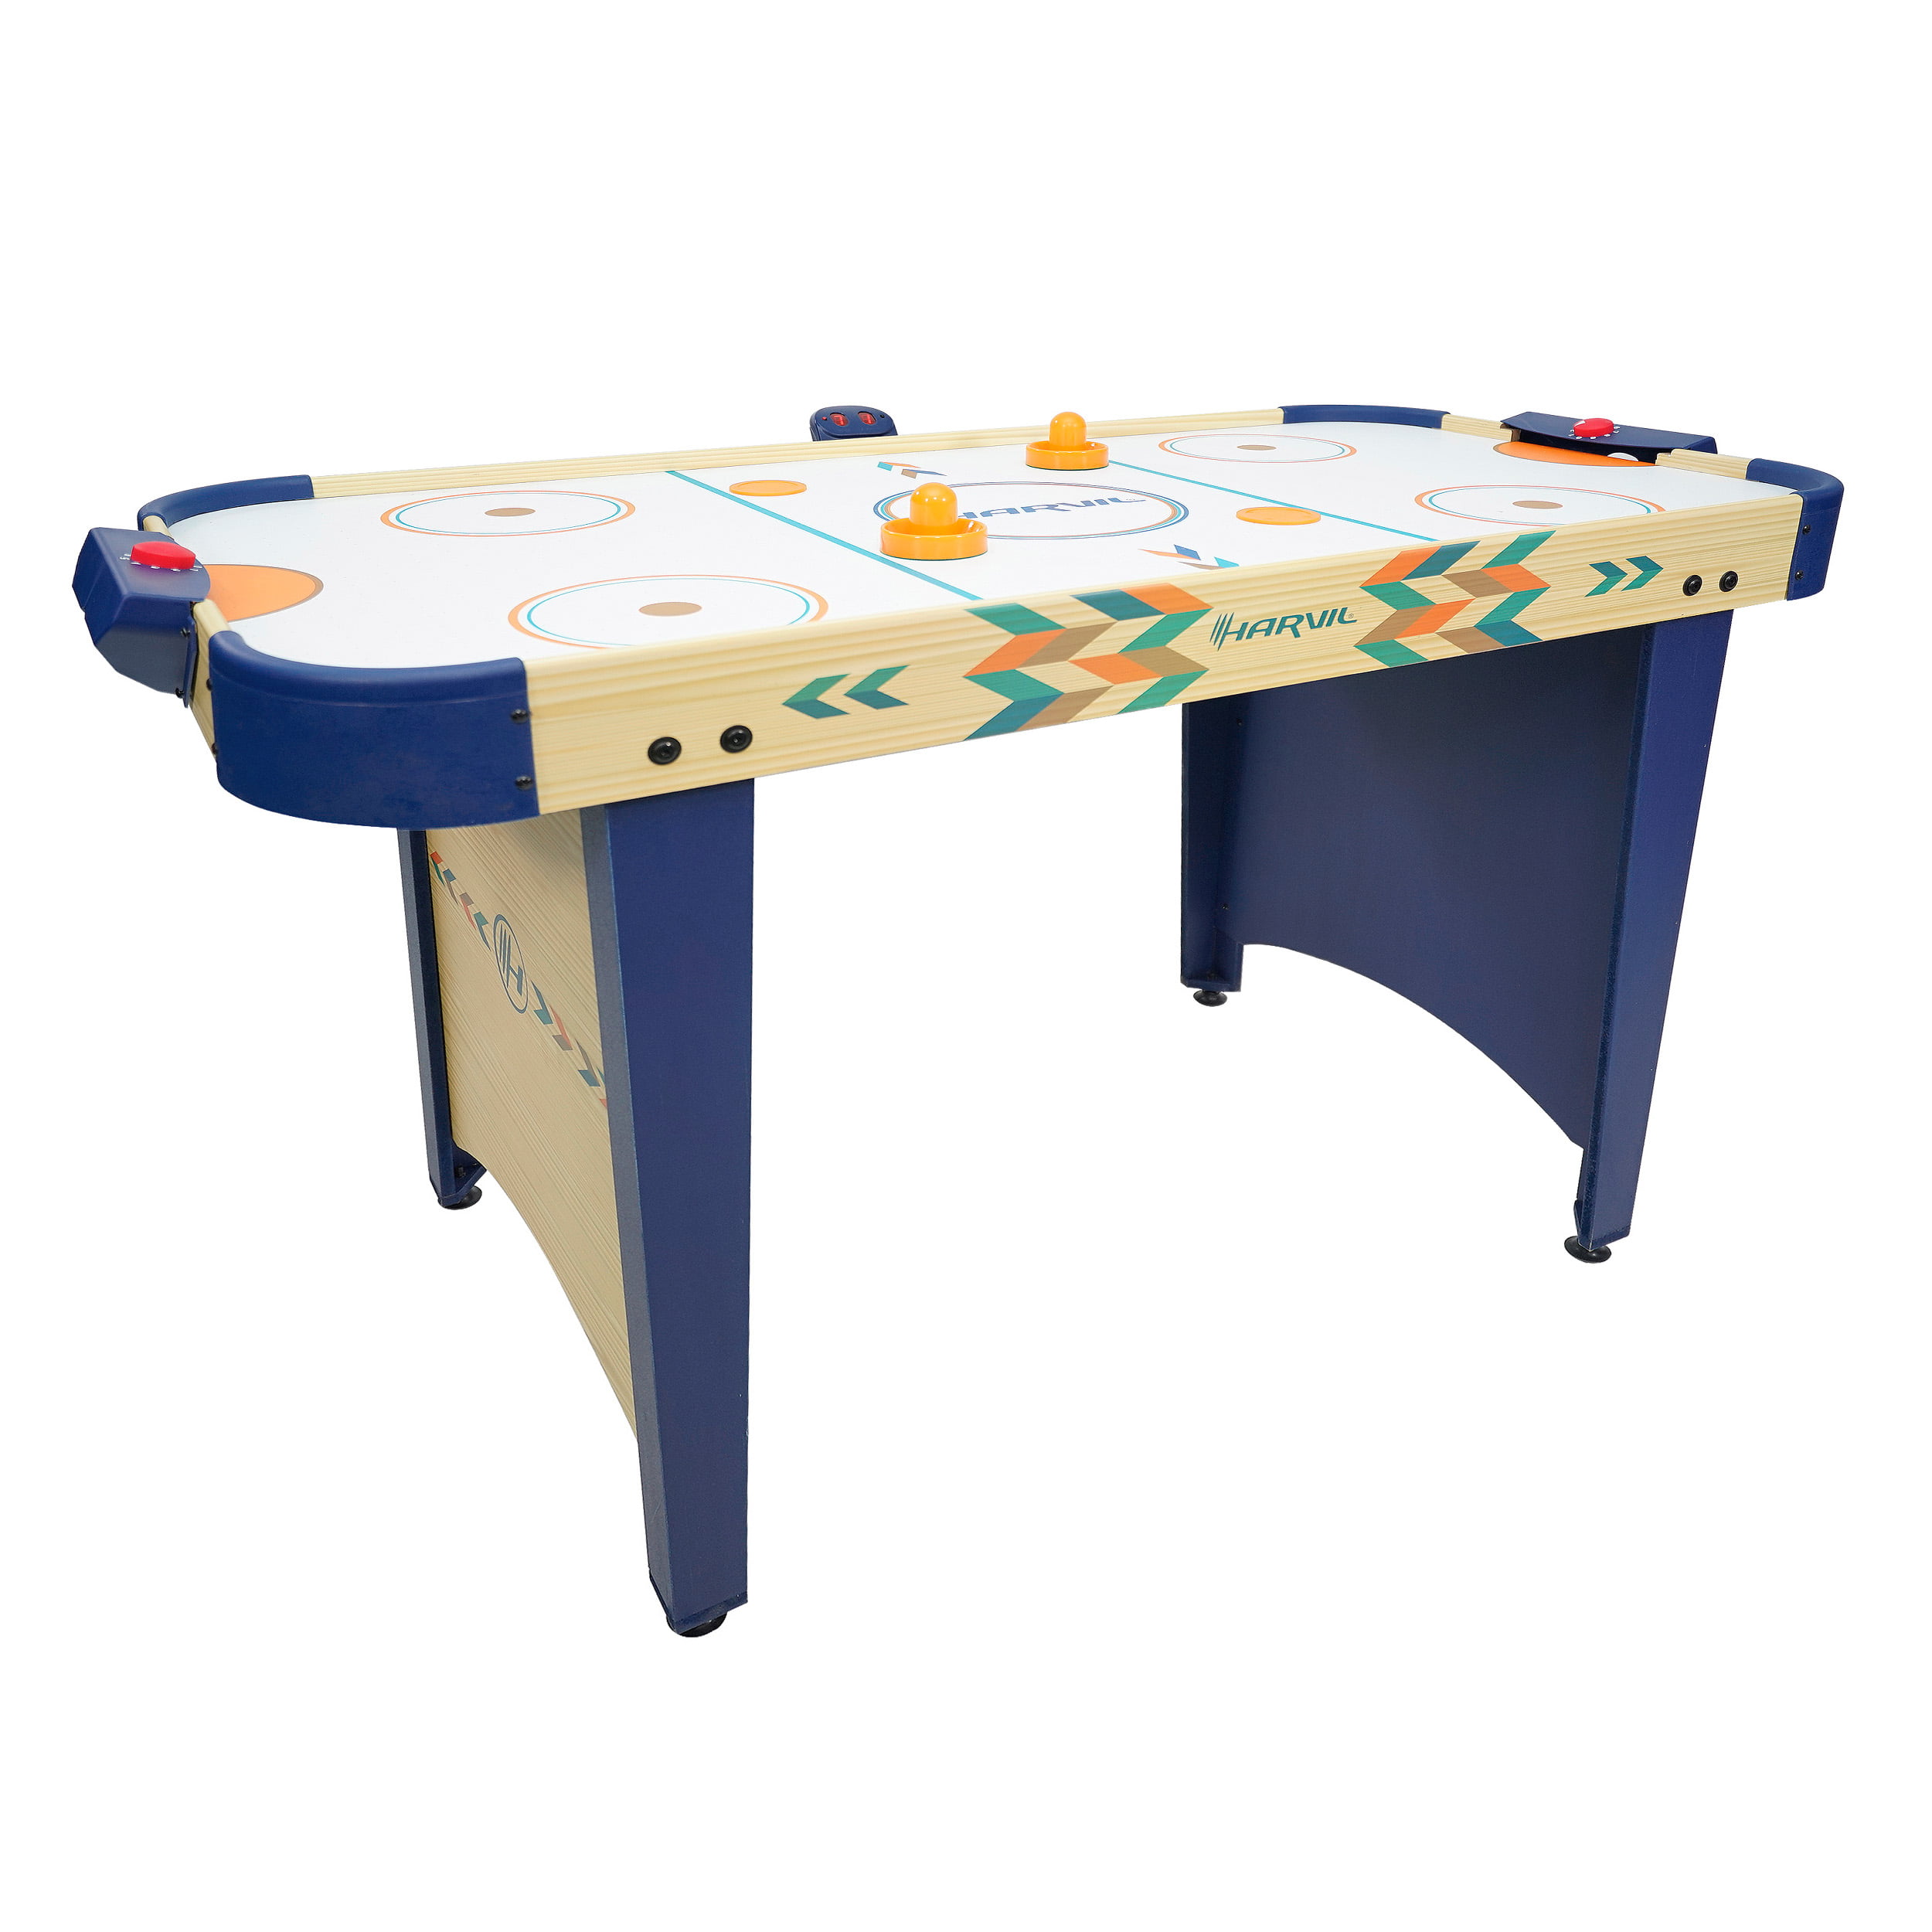 Harvil 4 Foot Air Hockey Game Table for Kids and Adults with Electronic Scorer Free Pushers and Pucks